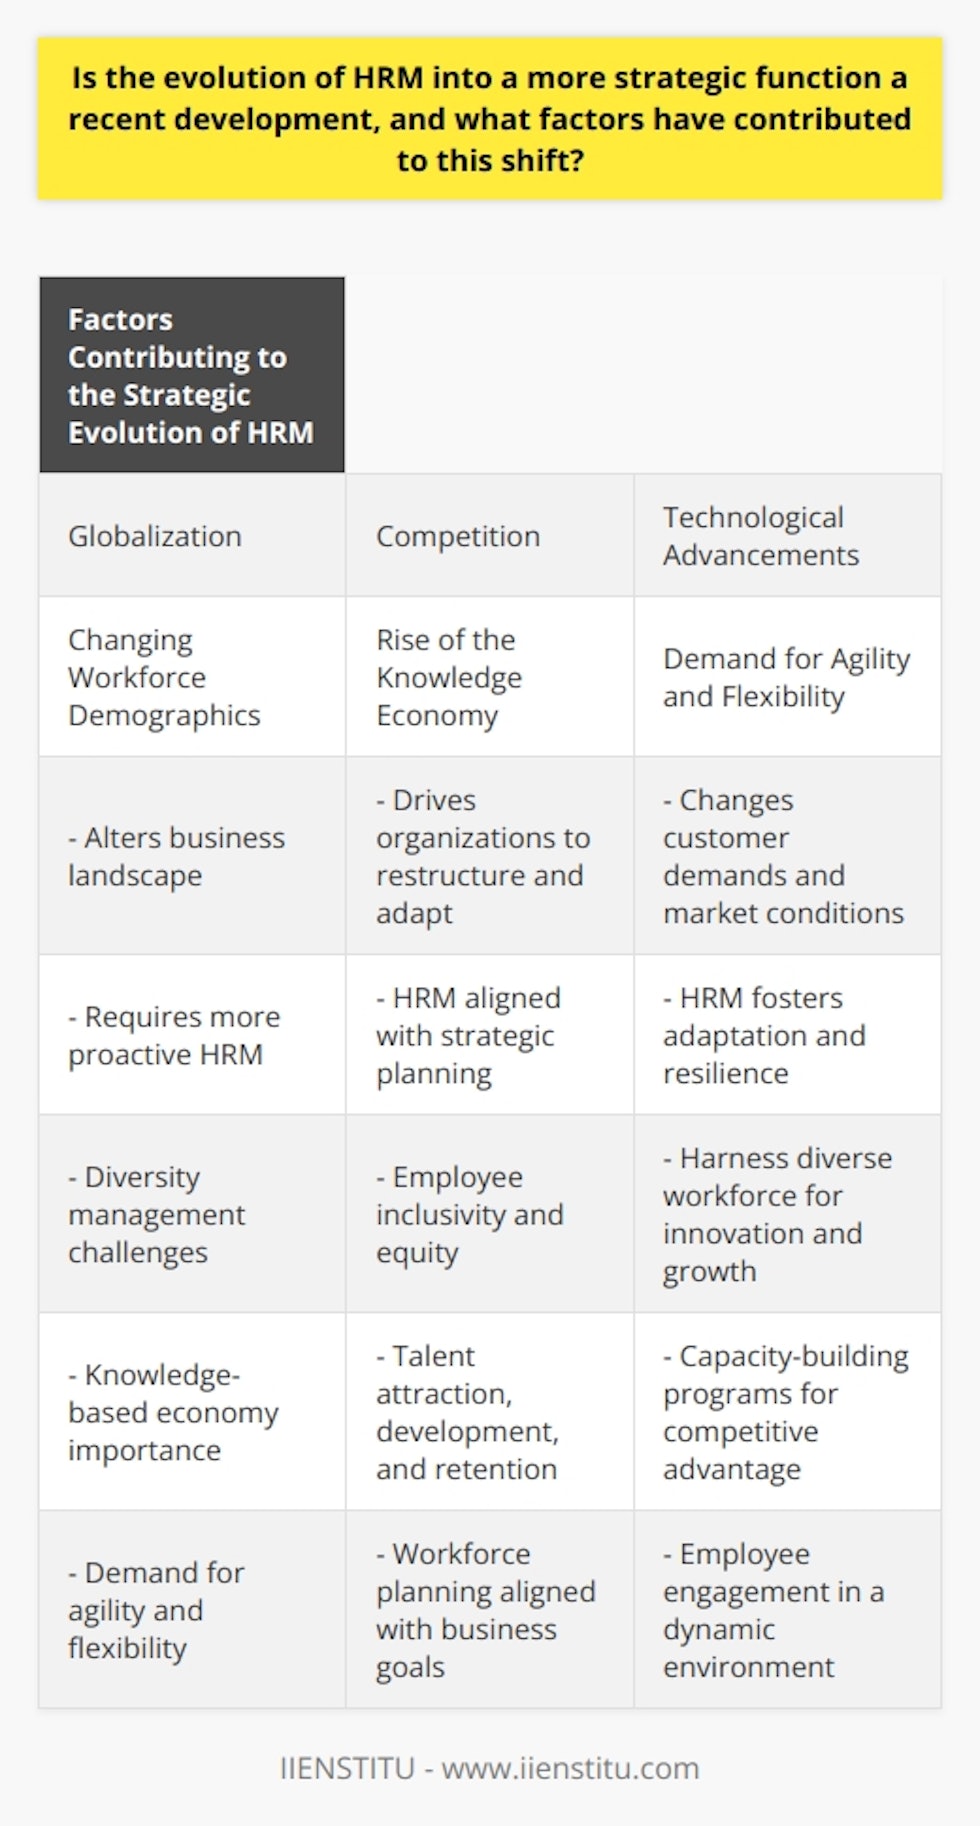 The transformation of HRM into a more strategic function is a recent development in the business world, driven by various factors that have significantly contributed to this shift. These factors include globalization, competition, technological advancements, changing workforce demographics, the rise of the knowledge economy, and the demand for agility and flexibility.Globalization, competition, and technological advancements have changed the business landscape, necessitating organizations to restructure and adapt. In response, HRM has evolved to become more proactive and integrated into an organization's strategic planning process. This ensures that human resources policies and practices align with the overall strategic goals of the organization, leading to improved performance and sustainability in competitive markets.The growing diversity of the workforce, including differences in age, gender, race, and cultural backgrounds, presents challenges in managing human capital effectively. HRM plays a crucial role in promoting inclusivity and diversity within organizations. By integrating diversity initiatives and equity policies into their overall strategy, organizations can harness the unique strengths of their diverse workforce to drive innovation and growth.In an increasingly knowledge-based economy, an organization's success relies heavily on its human capital and the knowledge, skills, and experiences possessed by its workforce. Hence HRM has been tasked with strategically managing this valuable resource by attracting, developing, and retaining talented individuals. Implementing effective talent management and capacity-building programs empowers employees to contribute to the organization's competitive advantage.The demand for agility and flexibility in organizations stems from evolving customer demands and market conditions. HRM must adopt a strategic approach to navigate change and uncertainty by aligning workforce planning and employee engagement initiatives with business goals. This fosters a culture of adaptation and resilience, positioning organizations to capitalize on growth opportunities in a dynamic business environment.In conclusion, the evolution of HRM into a more strategic function is a recent development influenced by globalization, competition, technological advancements, changing workforce demographics, the rise of the knowledge economy, and the demand for agility and flexibility. By incorporating strategic human resource management practices, organizations can effectively leverage their human capital as a key enabler of successful business outcomes.